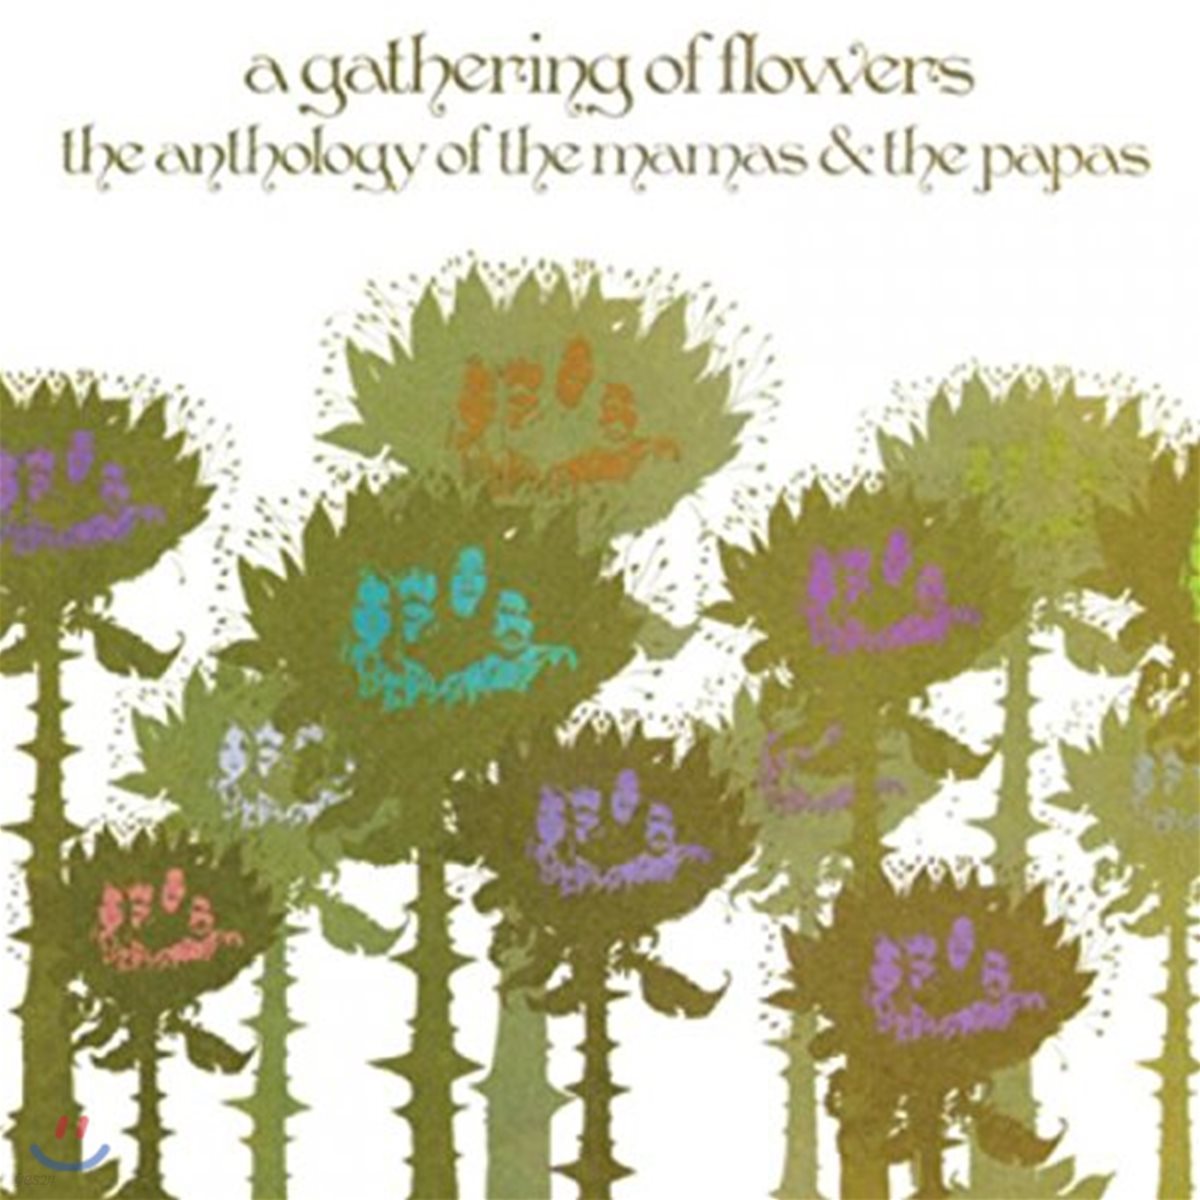 The Mamas & The Papas (마마스 앤 파파스) - A Gathering of Flowers: The Anthology of the Mamas and the Papas